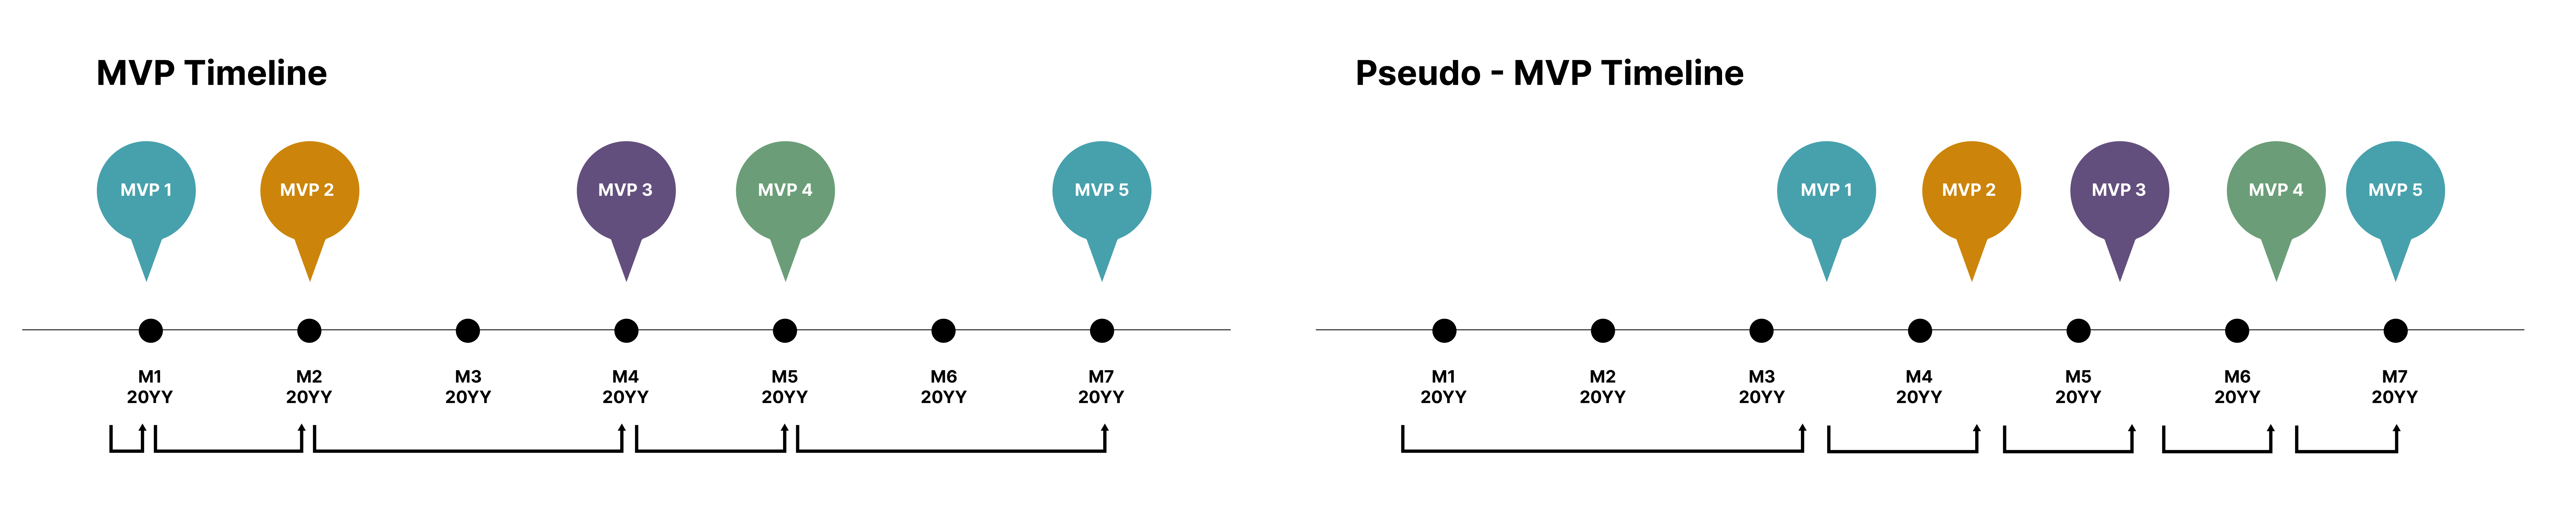 Comparison of a well-planned MVP that enables effective feedback loops with a compressed pseudo-MVP that does not.